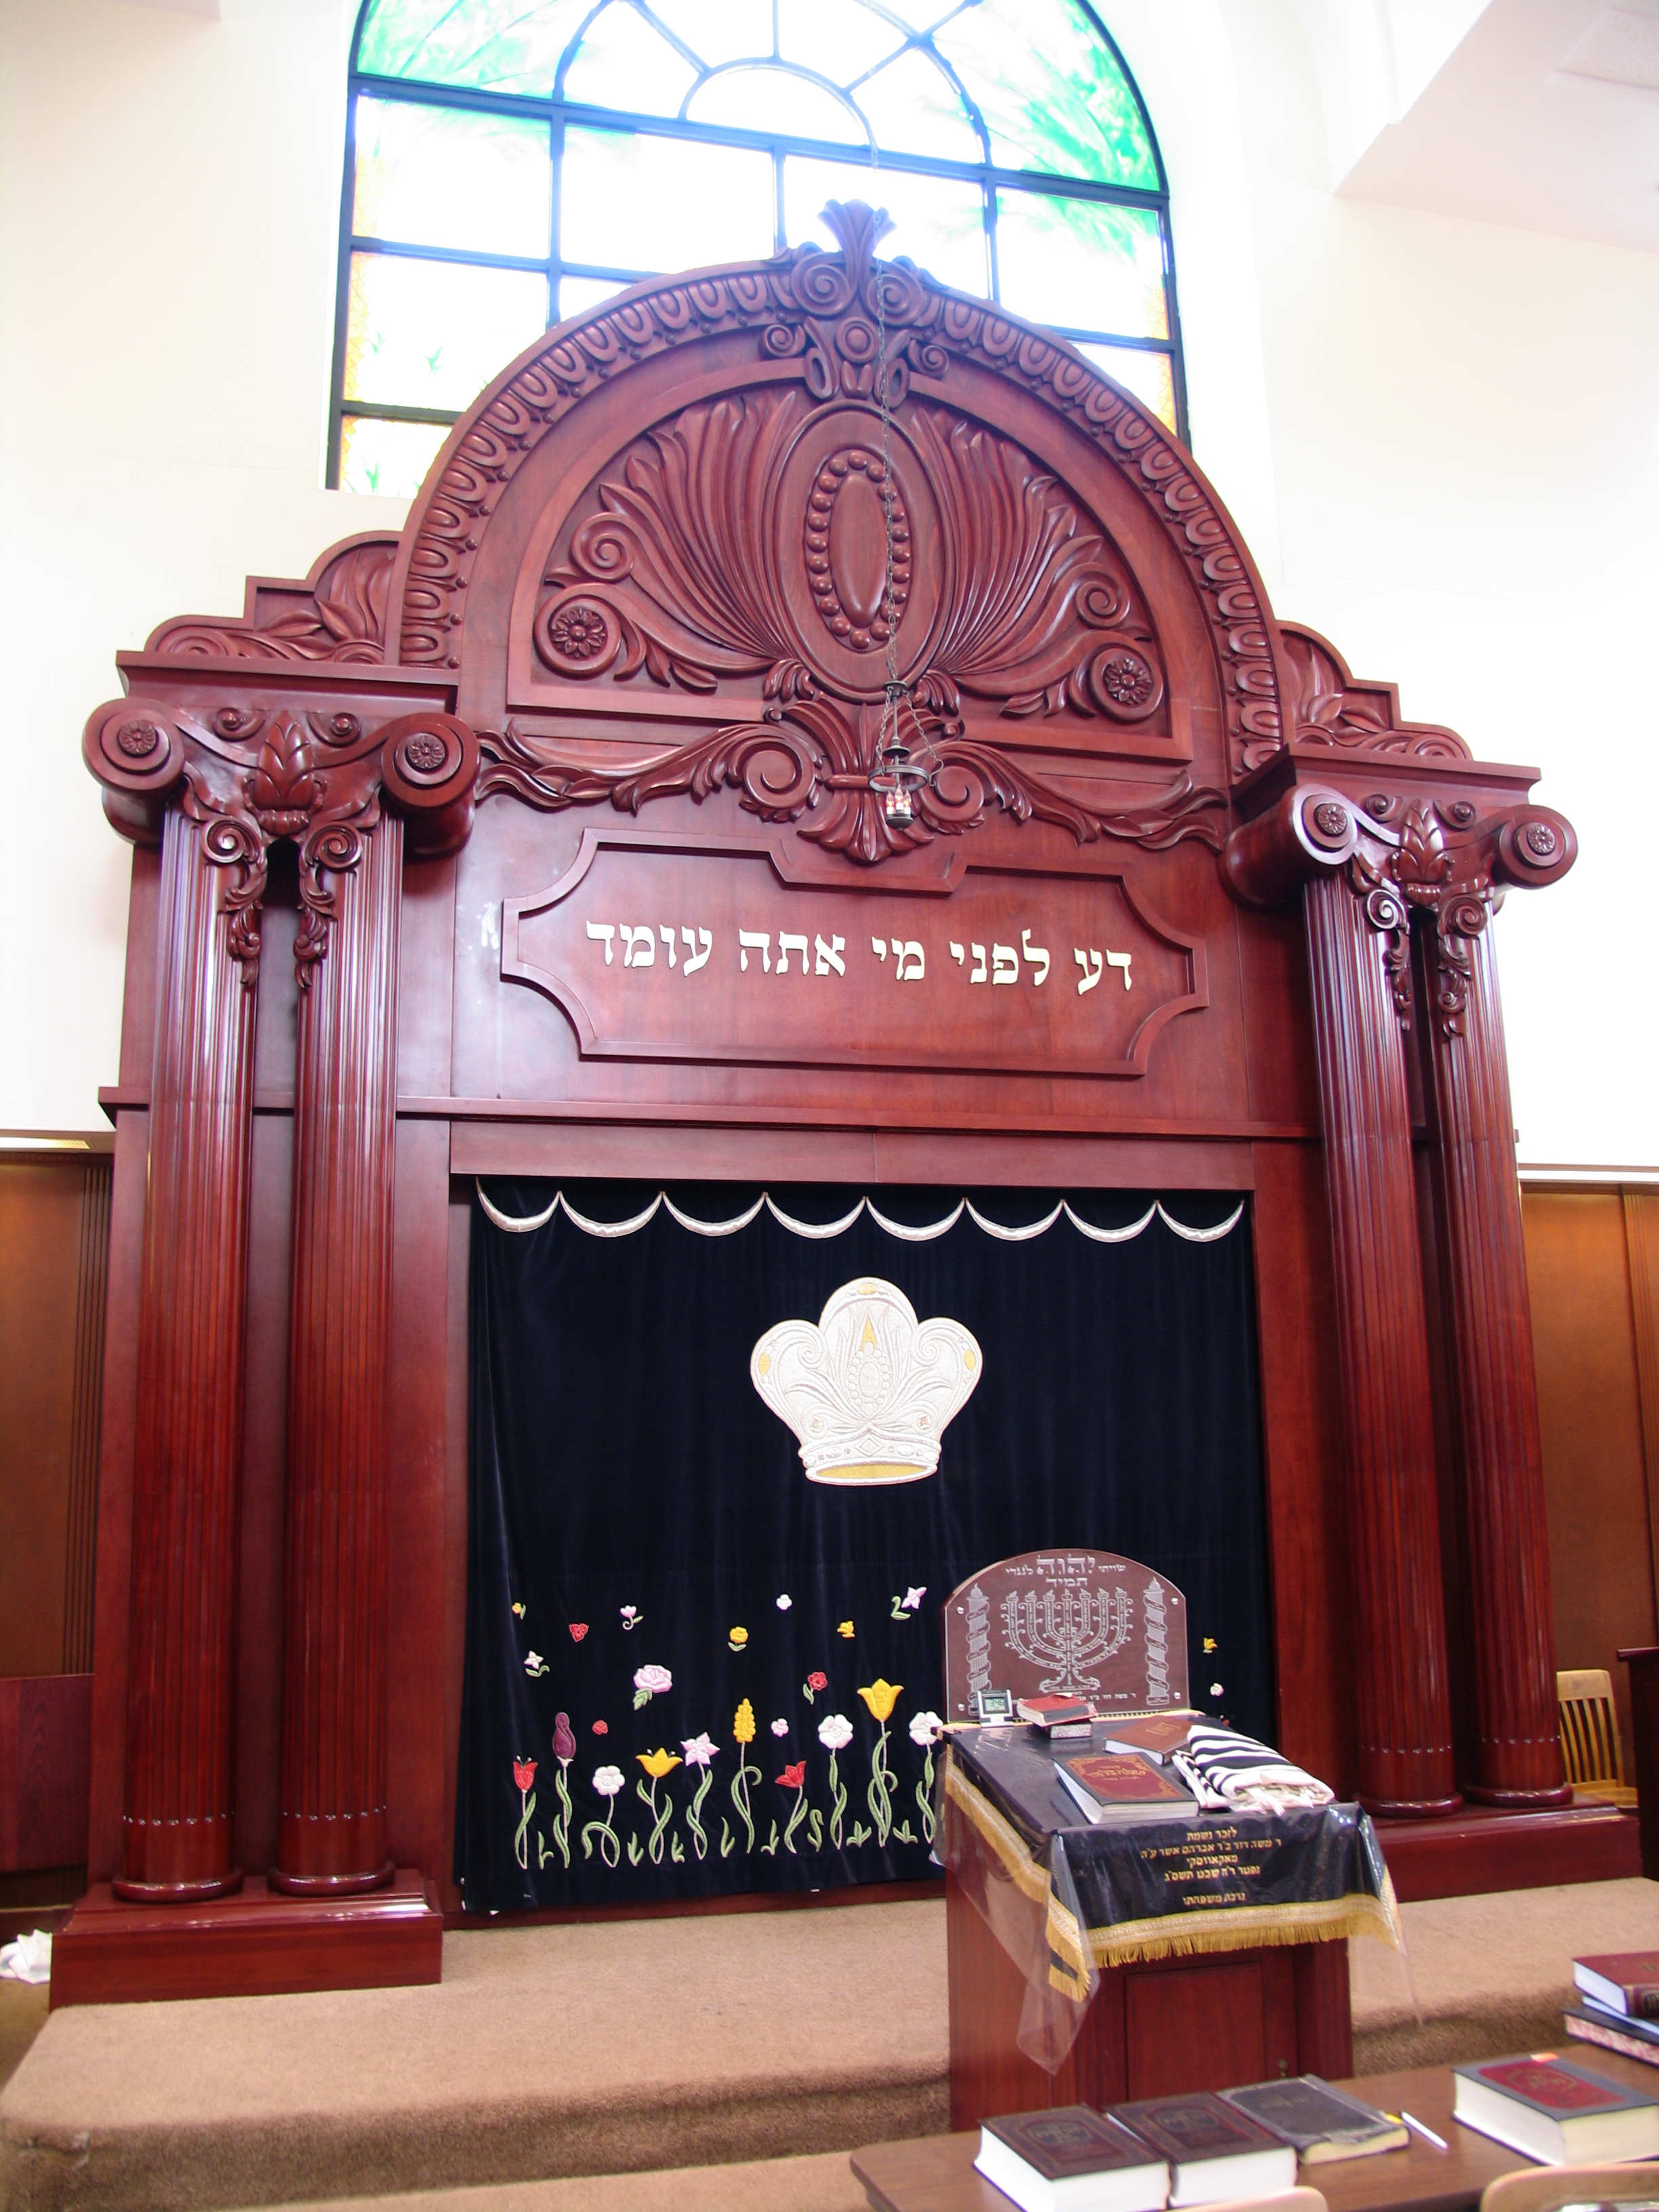 Wooden work inside a Jewish temple.